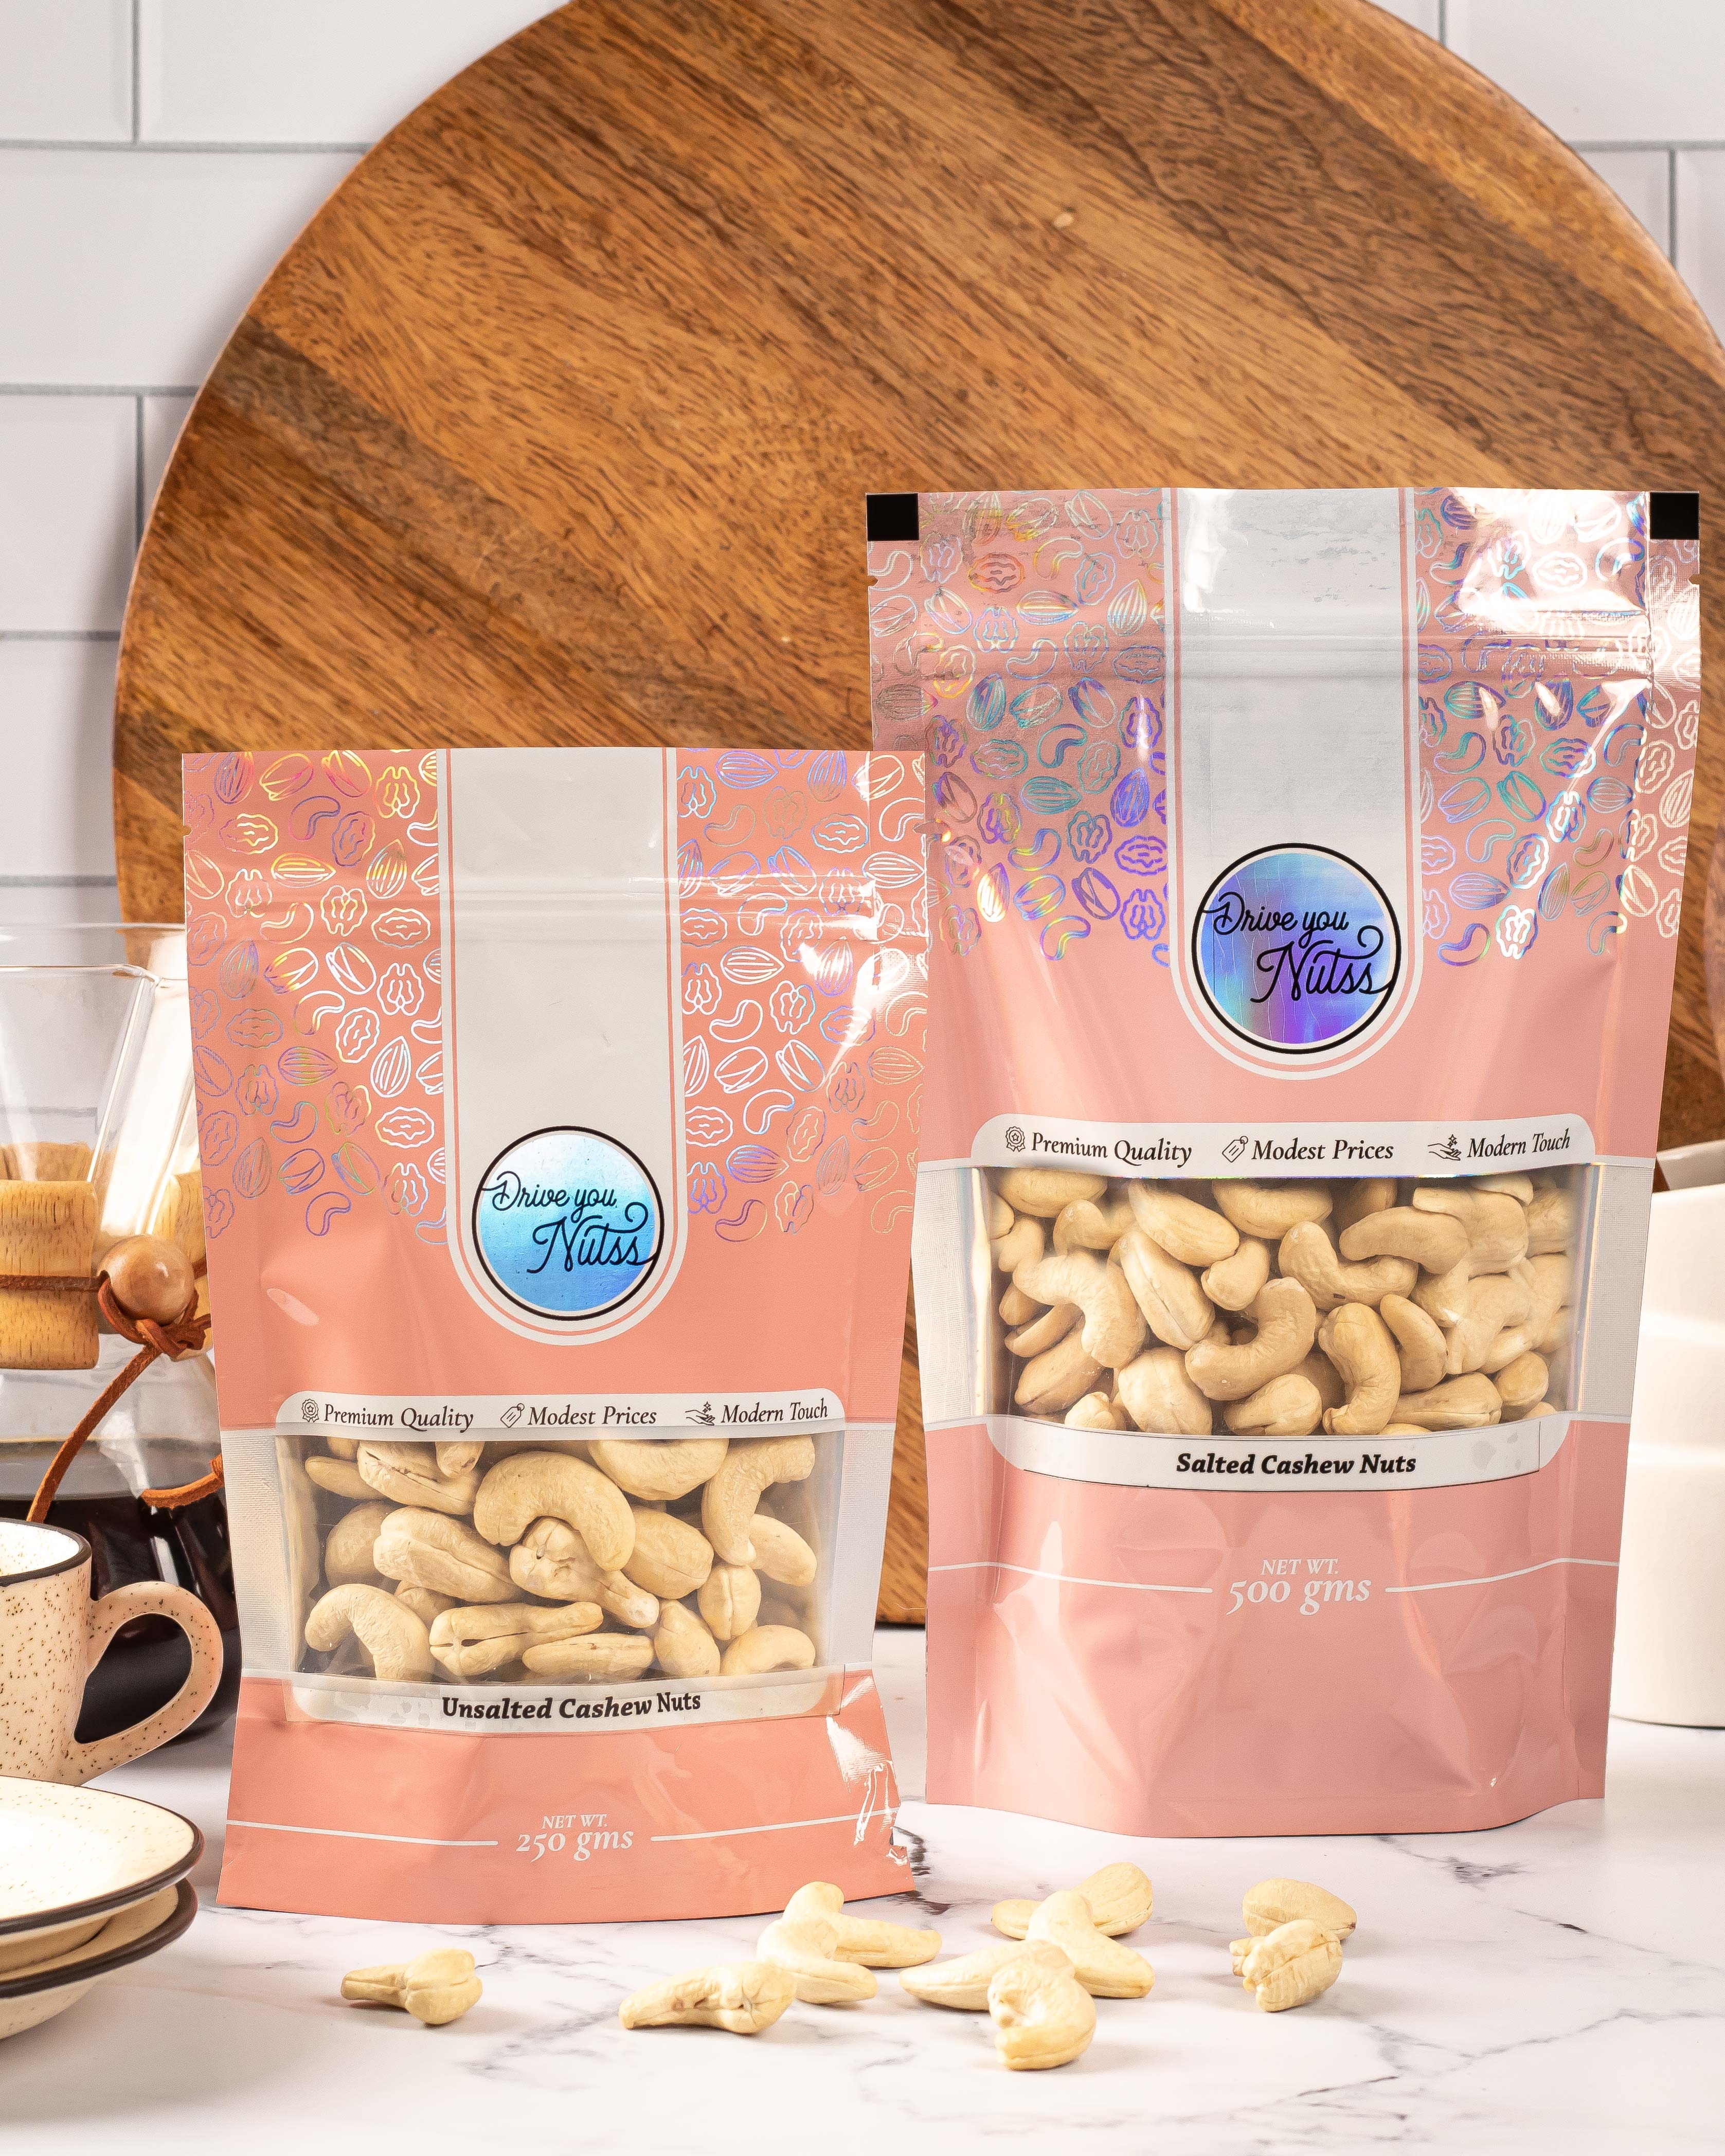 Salted Cashew Nuts (250 Gms)